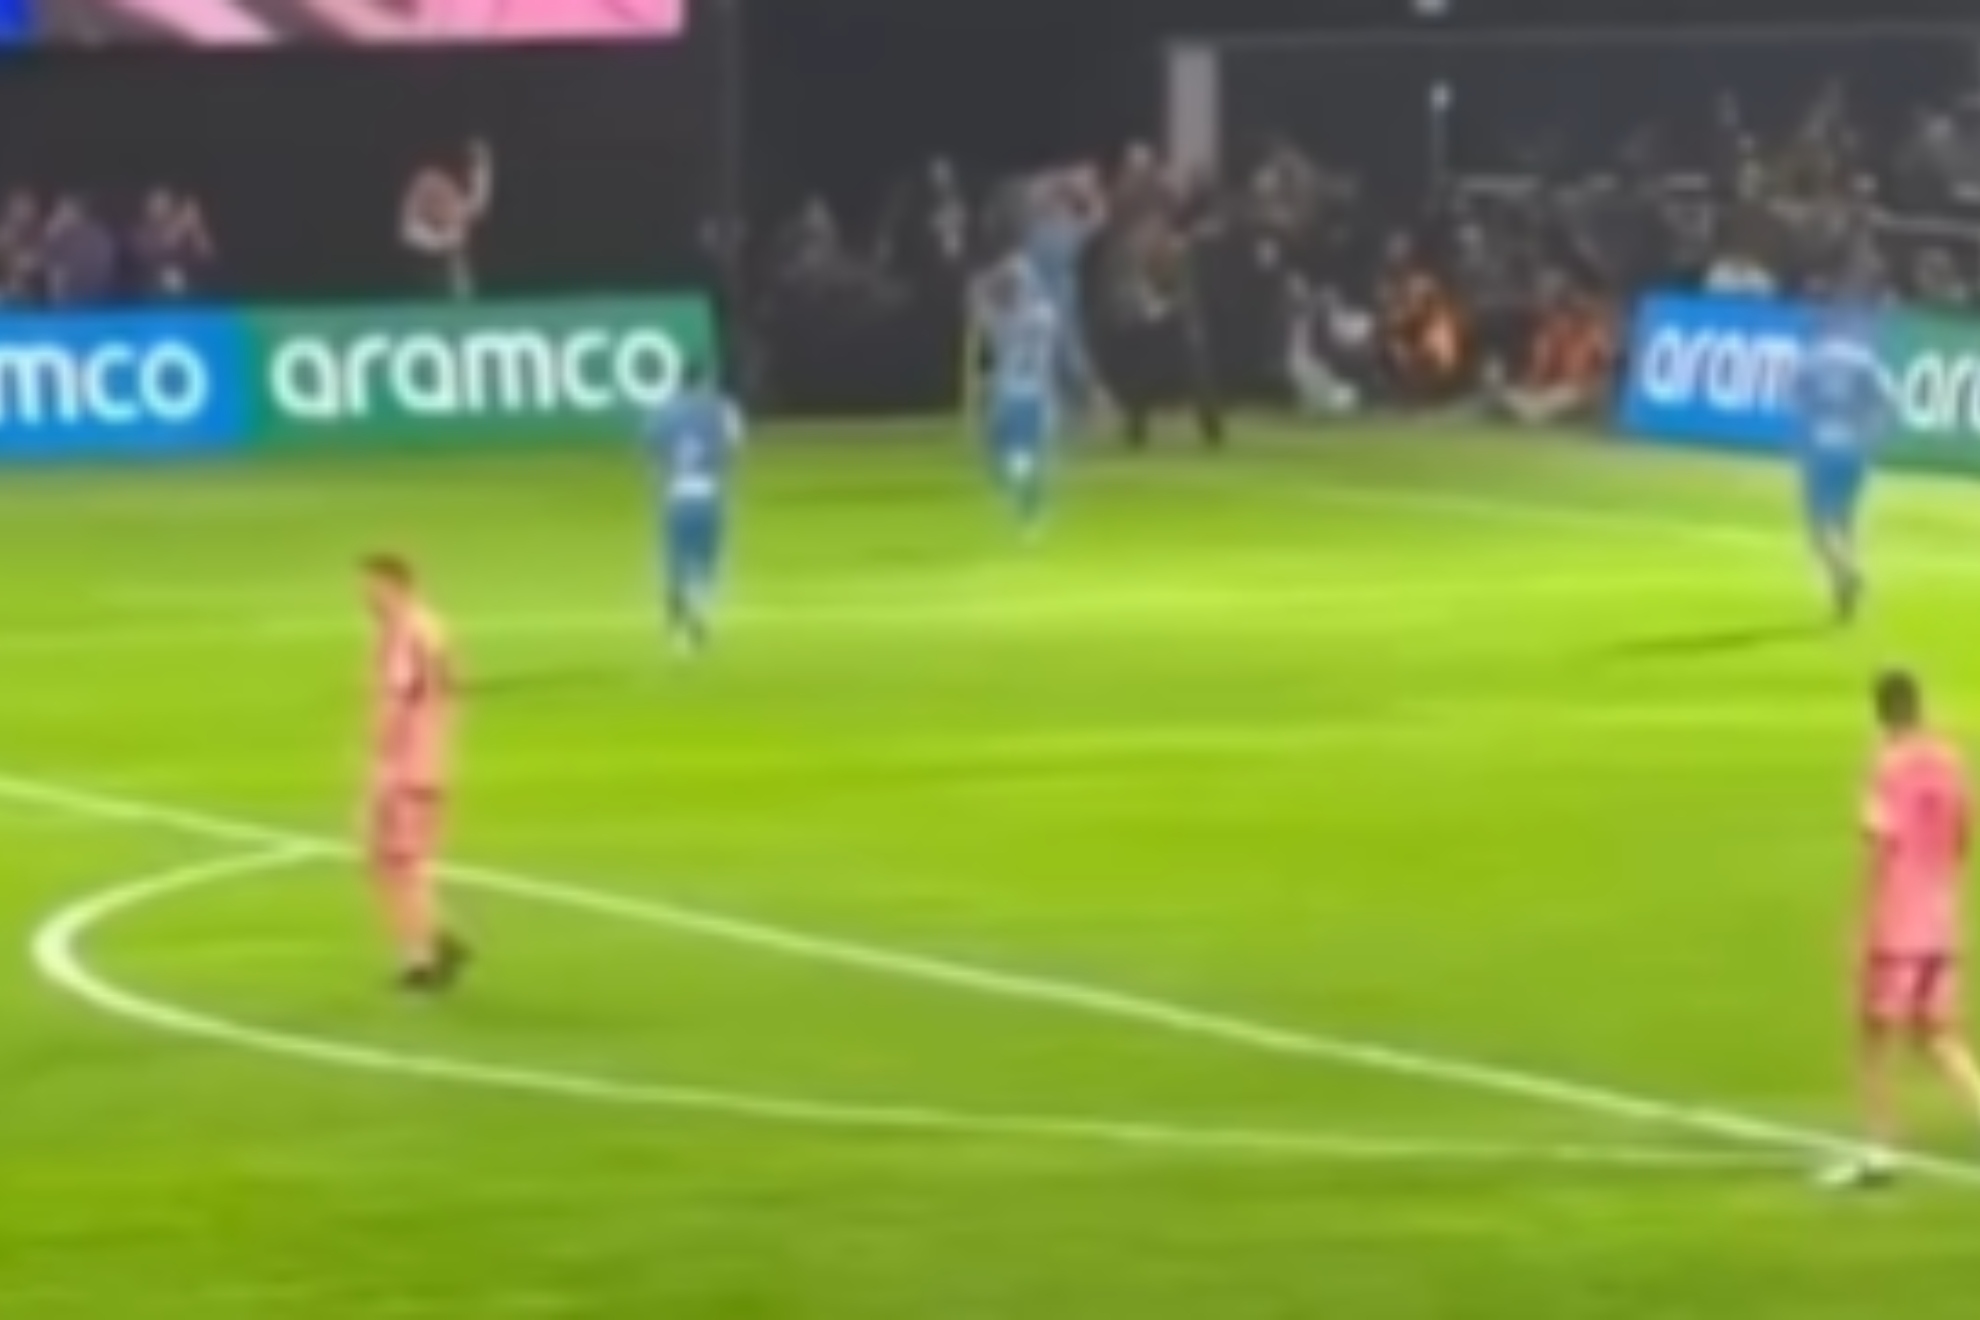 Al Hilal player tries to taunt Messi with Ronaldo-style celebration, Leo didnt even notice